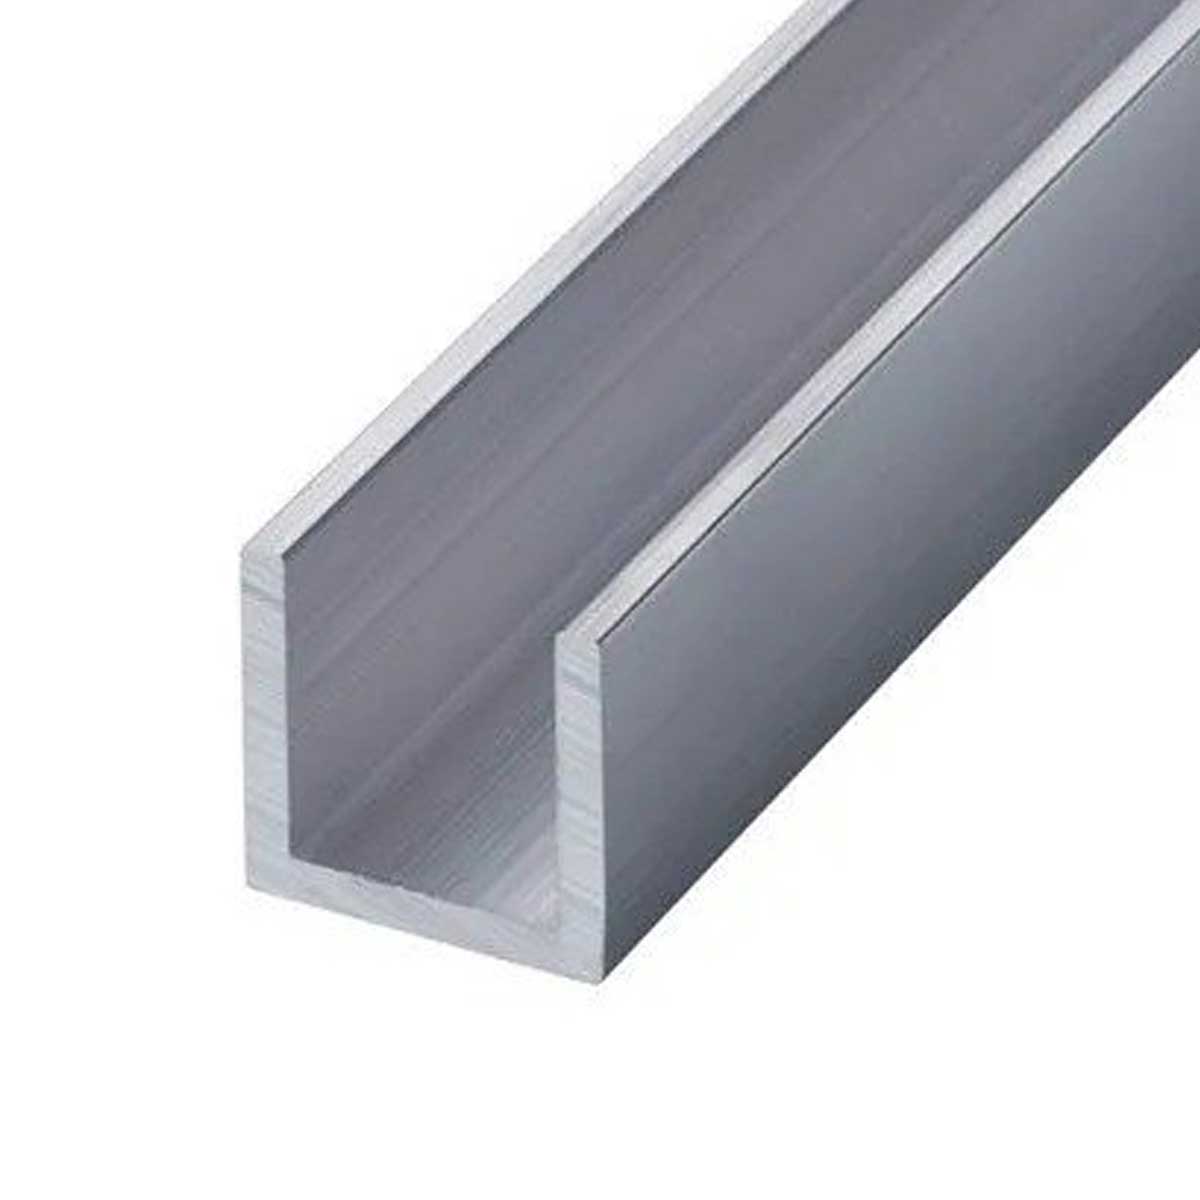 Aluminium C Channel For Construction Manufacturers, Suppliers in Warangal